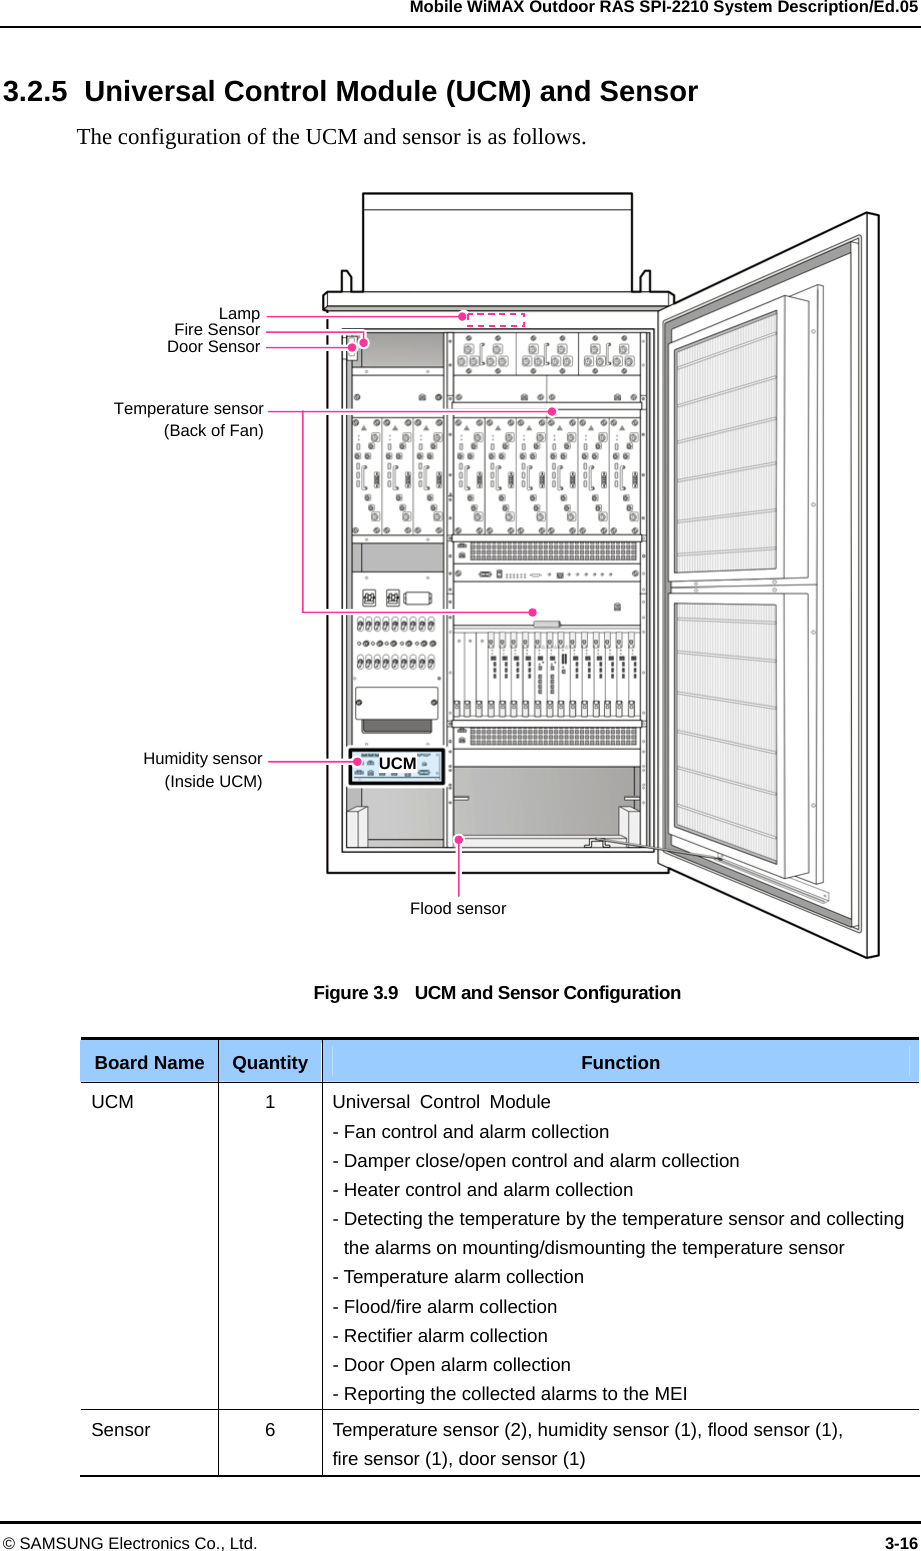   Mobile WiMAX Outdoor RAS SPI-2210 System Description/Ed.05 © SAMSUNG Electronics Co., Ltd.  3-16 3.2.5  Universal Control Module (UCM) and Sensor The configuration of the UCM and sensor is as follows.  Figure 3.9    UCM and Sensor Configuration  Board Name  Quantity  Function UCM  1  Universal Control Module - Fan control and alarm collection - Damper close/open control and alarm collection - Heater control and alarm collection - Detecting the temperature by the temperature sensor and collecting the alarms on mounting/dismounting the temperature sensor - Temperature alarm collection - Flood/fire alarm collection - Rectifier alarm collection - Door Open alarm collection - Reporting the collected alarms to the MEI Sensor  6  Temperature sensor (2), humidity sensor (1), flood sensor (1),   fire sensor (1), door sensor (1) Fire Sensor UCM Door Sensor Humidity sensor (Inside UCM) Flood sensorTemperature sensor (Back of Fan) Lamp  